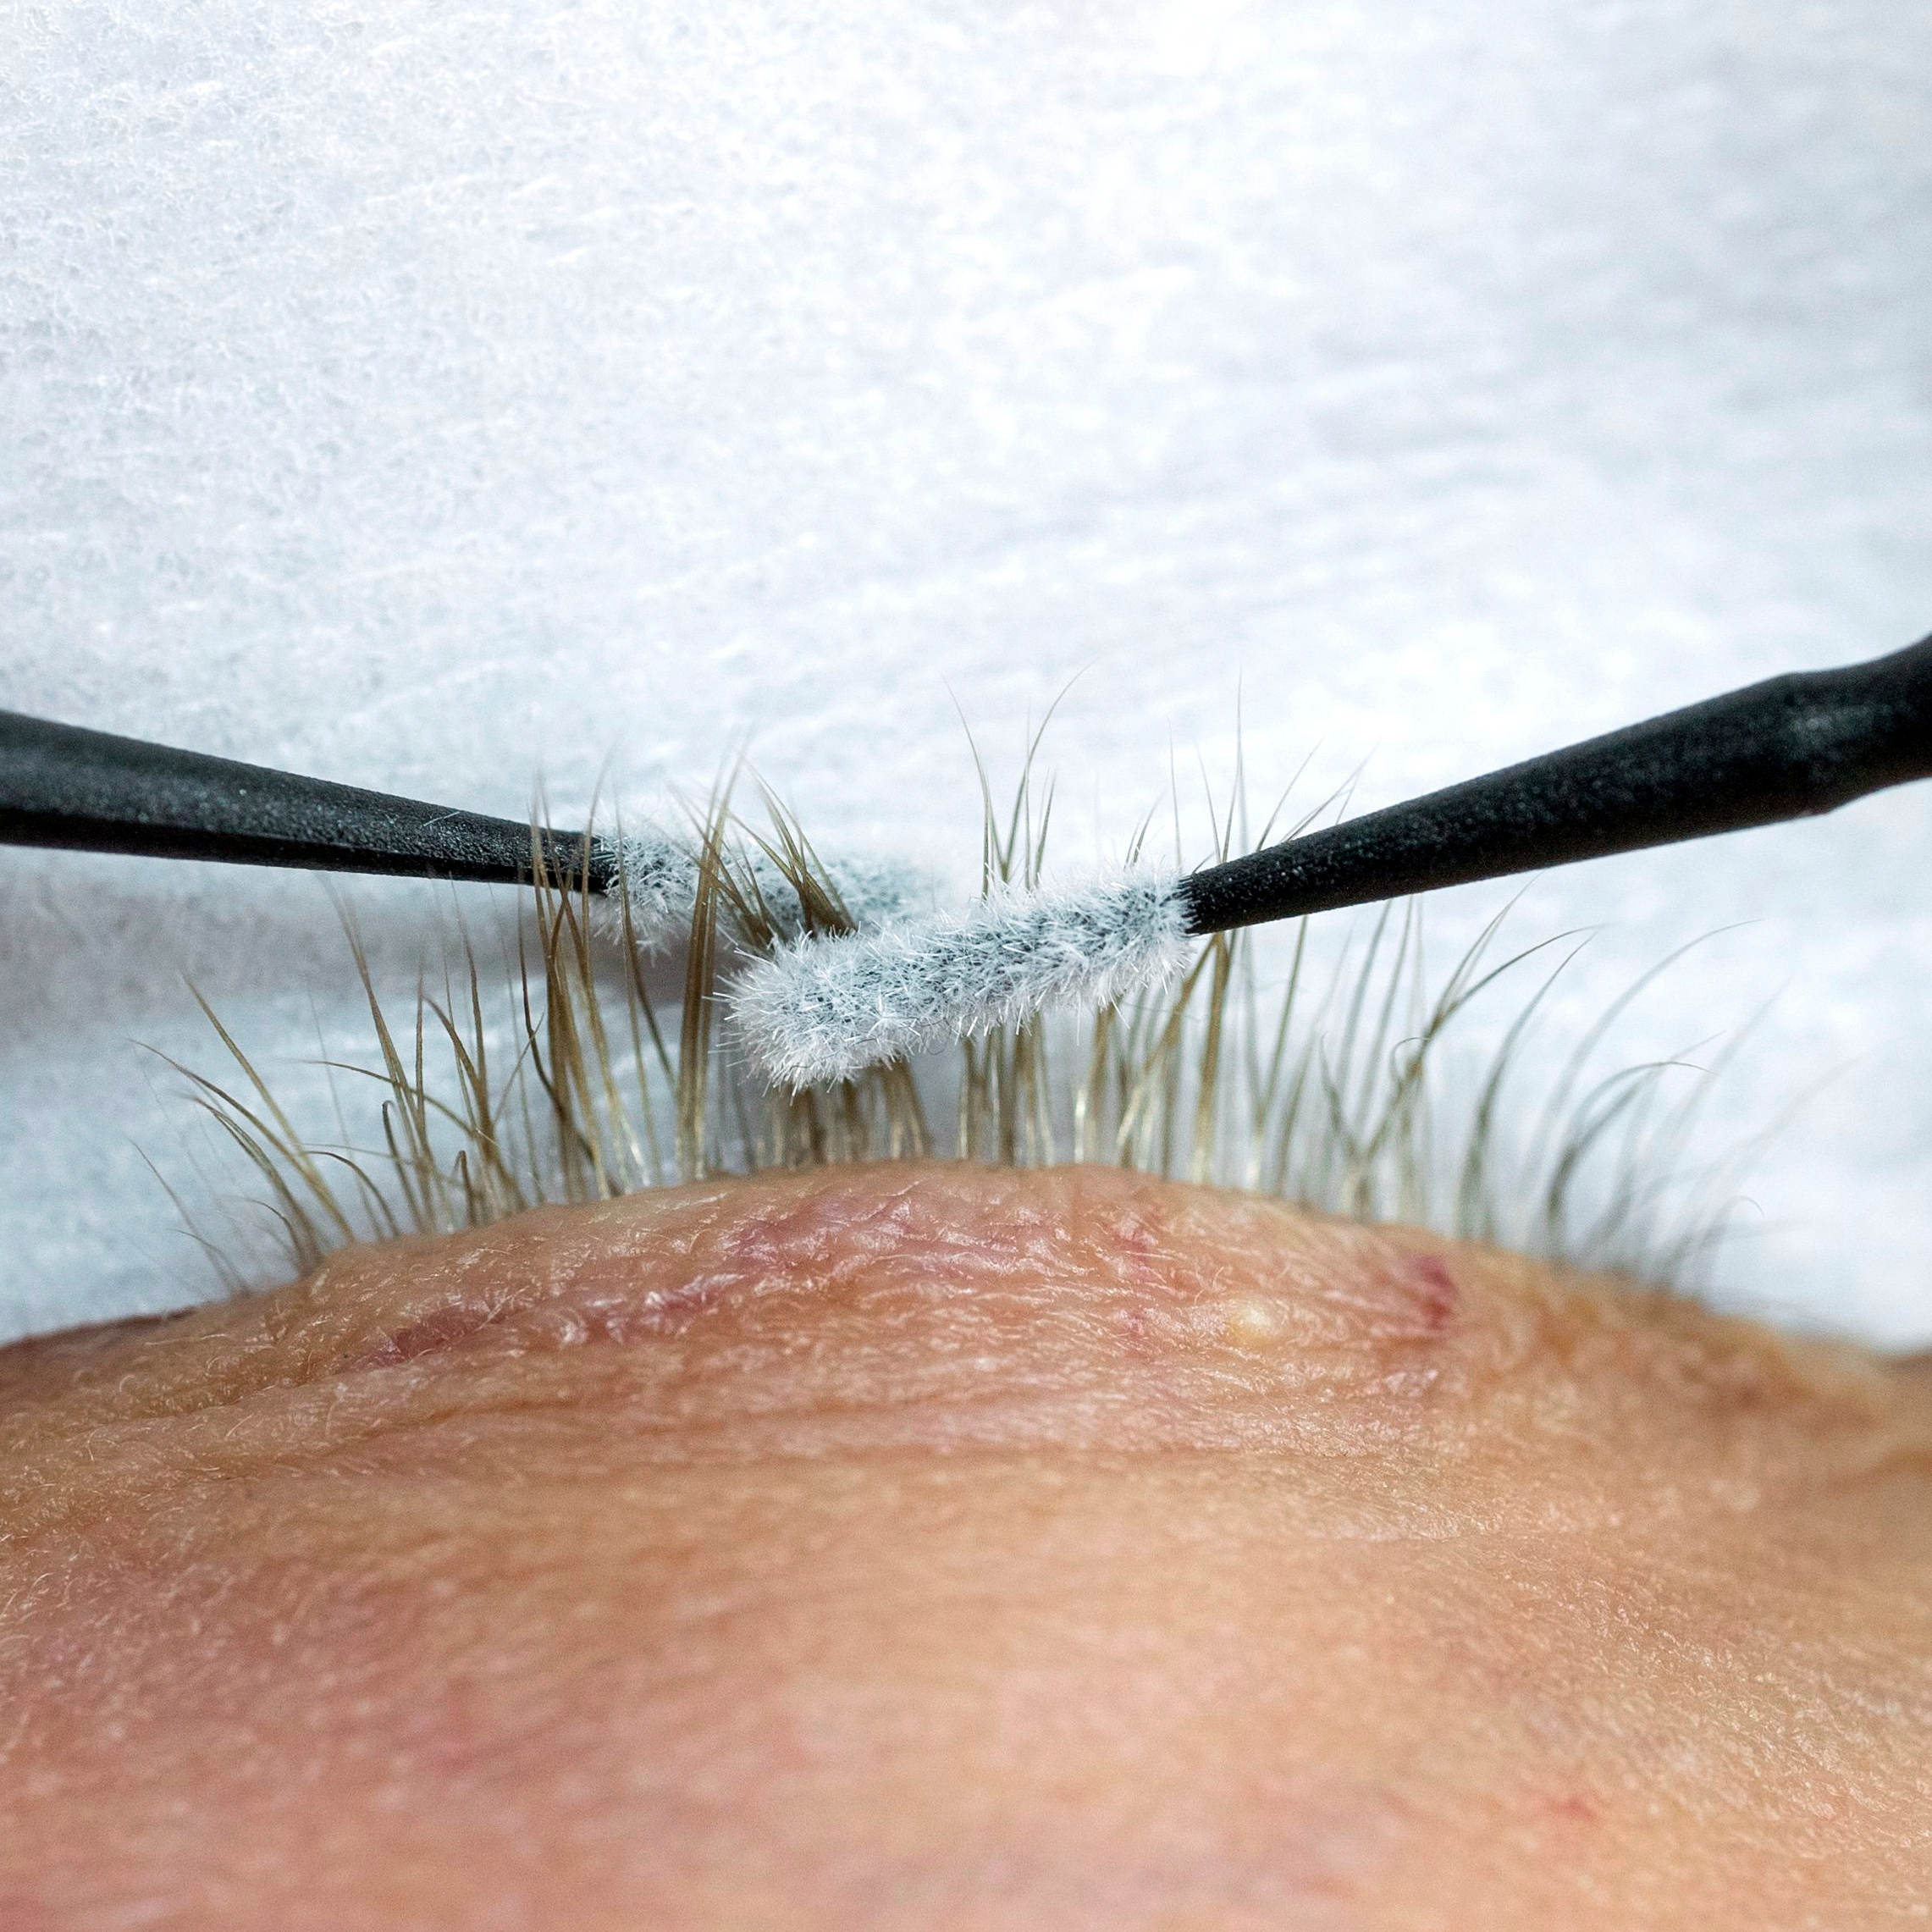 bondaid being applied to a client's natural lashes with microswabs